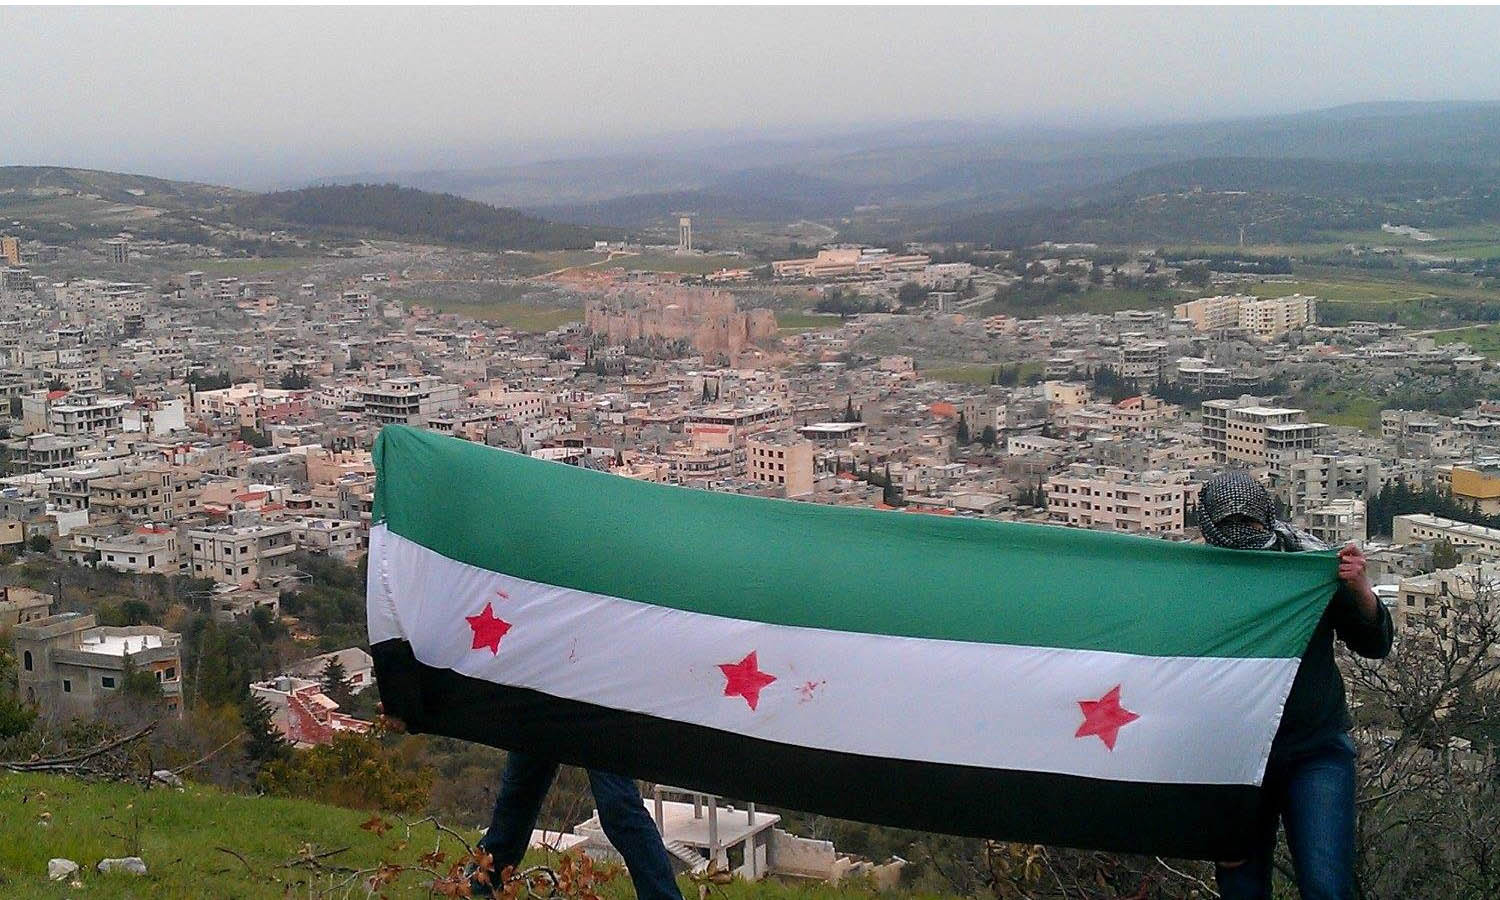 Opponents of the regime raise the flag of the Syrian revolution in the Ismaili-majority city of Masyaf in the northern Hama countryside (Masyaf Coordination Facebook page)